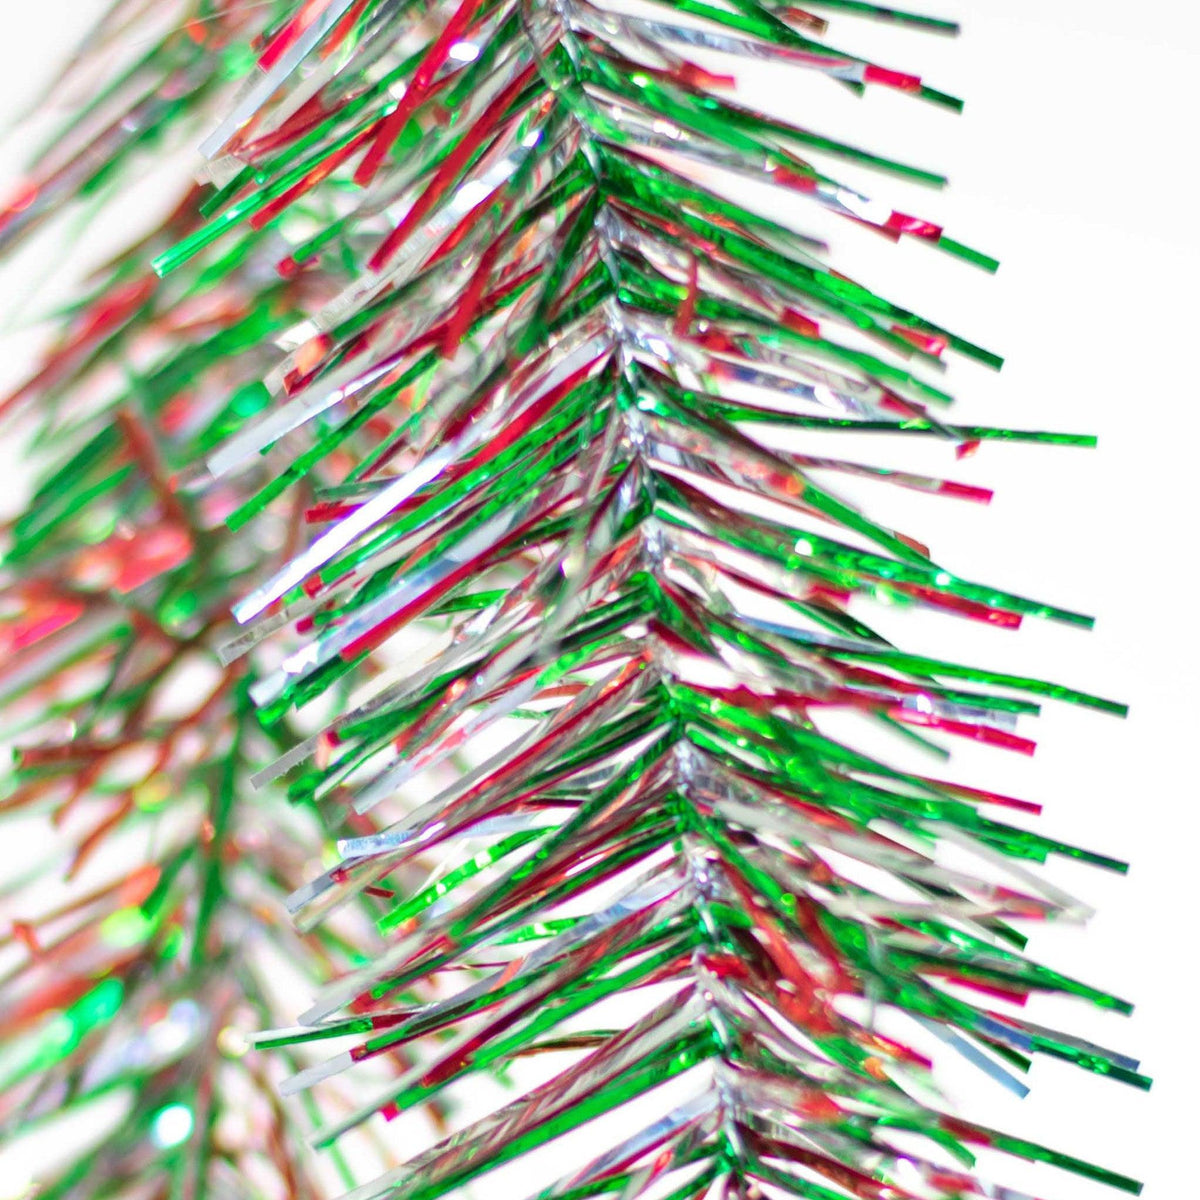 Lee Display's brand new 25ft Shiny Metallic Red, Green, and Silver Tinsel Garlands and Fringe Embellishments on sale at leedisplay.com